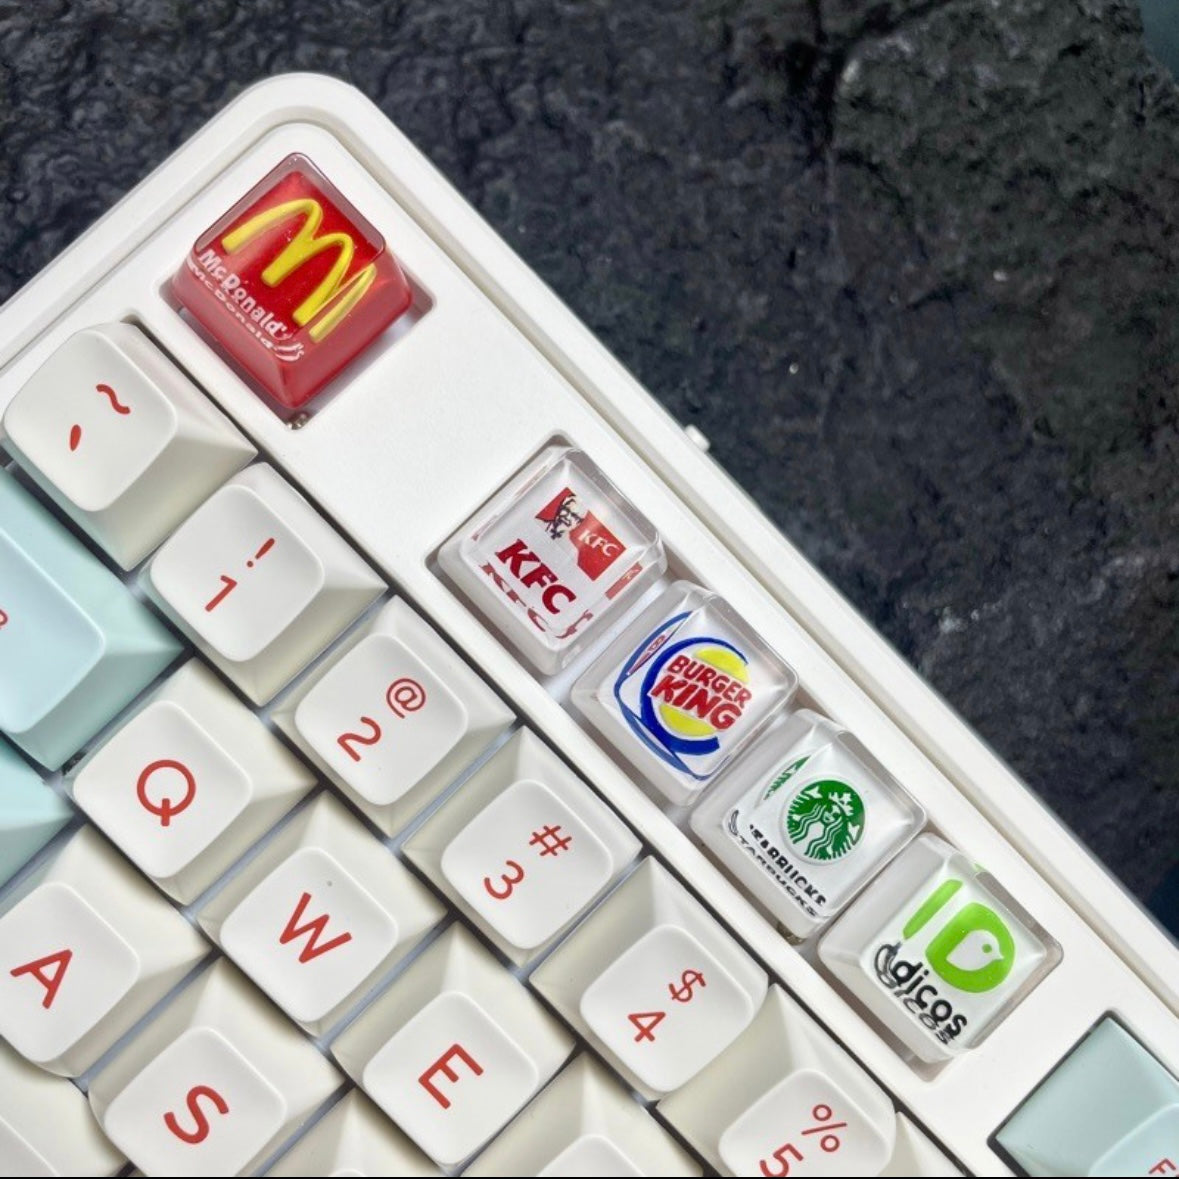 "Show your love for fast food and coffee giants with our custom artisan keycaps featuring iconic logos from Burger King, McDonald's, Starbucks, and KFC. These keycaps are a unique blend of foodie culture and keyboard aesthetics. Crafted with precision, they make a deliciously stylish addition to your setup. Express your passion for your favorite brands with these eye-catching keycaps." 🍔🍟🍗🍕☕💻 #KeyboardAccessories #ArtisanKeycaps #FastFoodLove